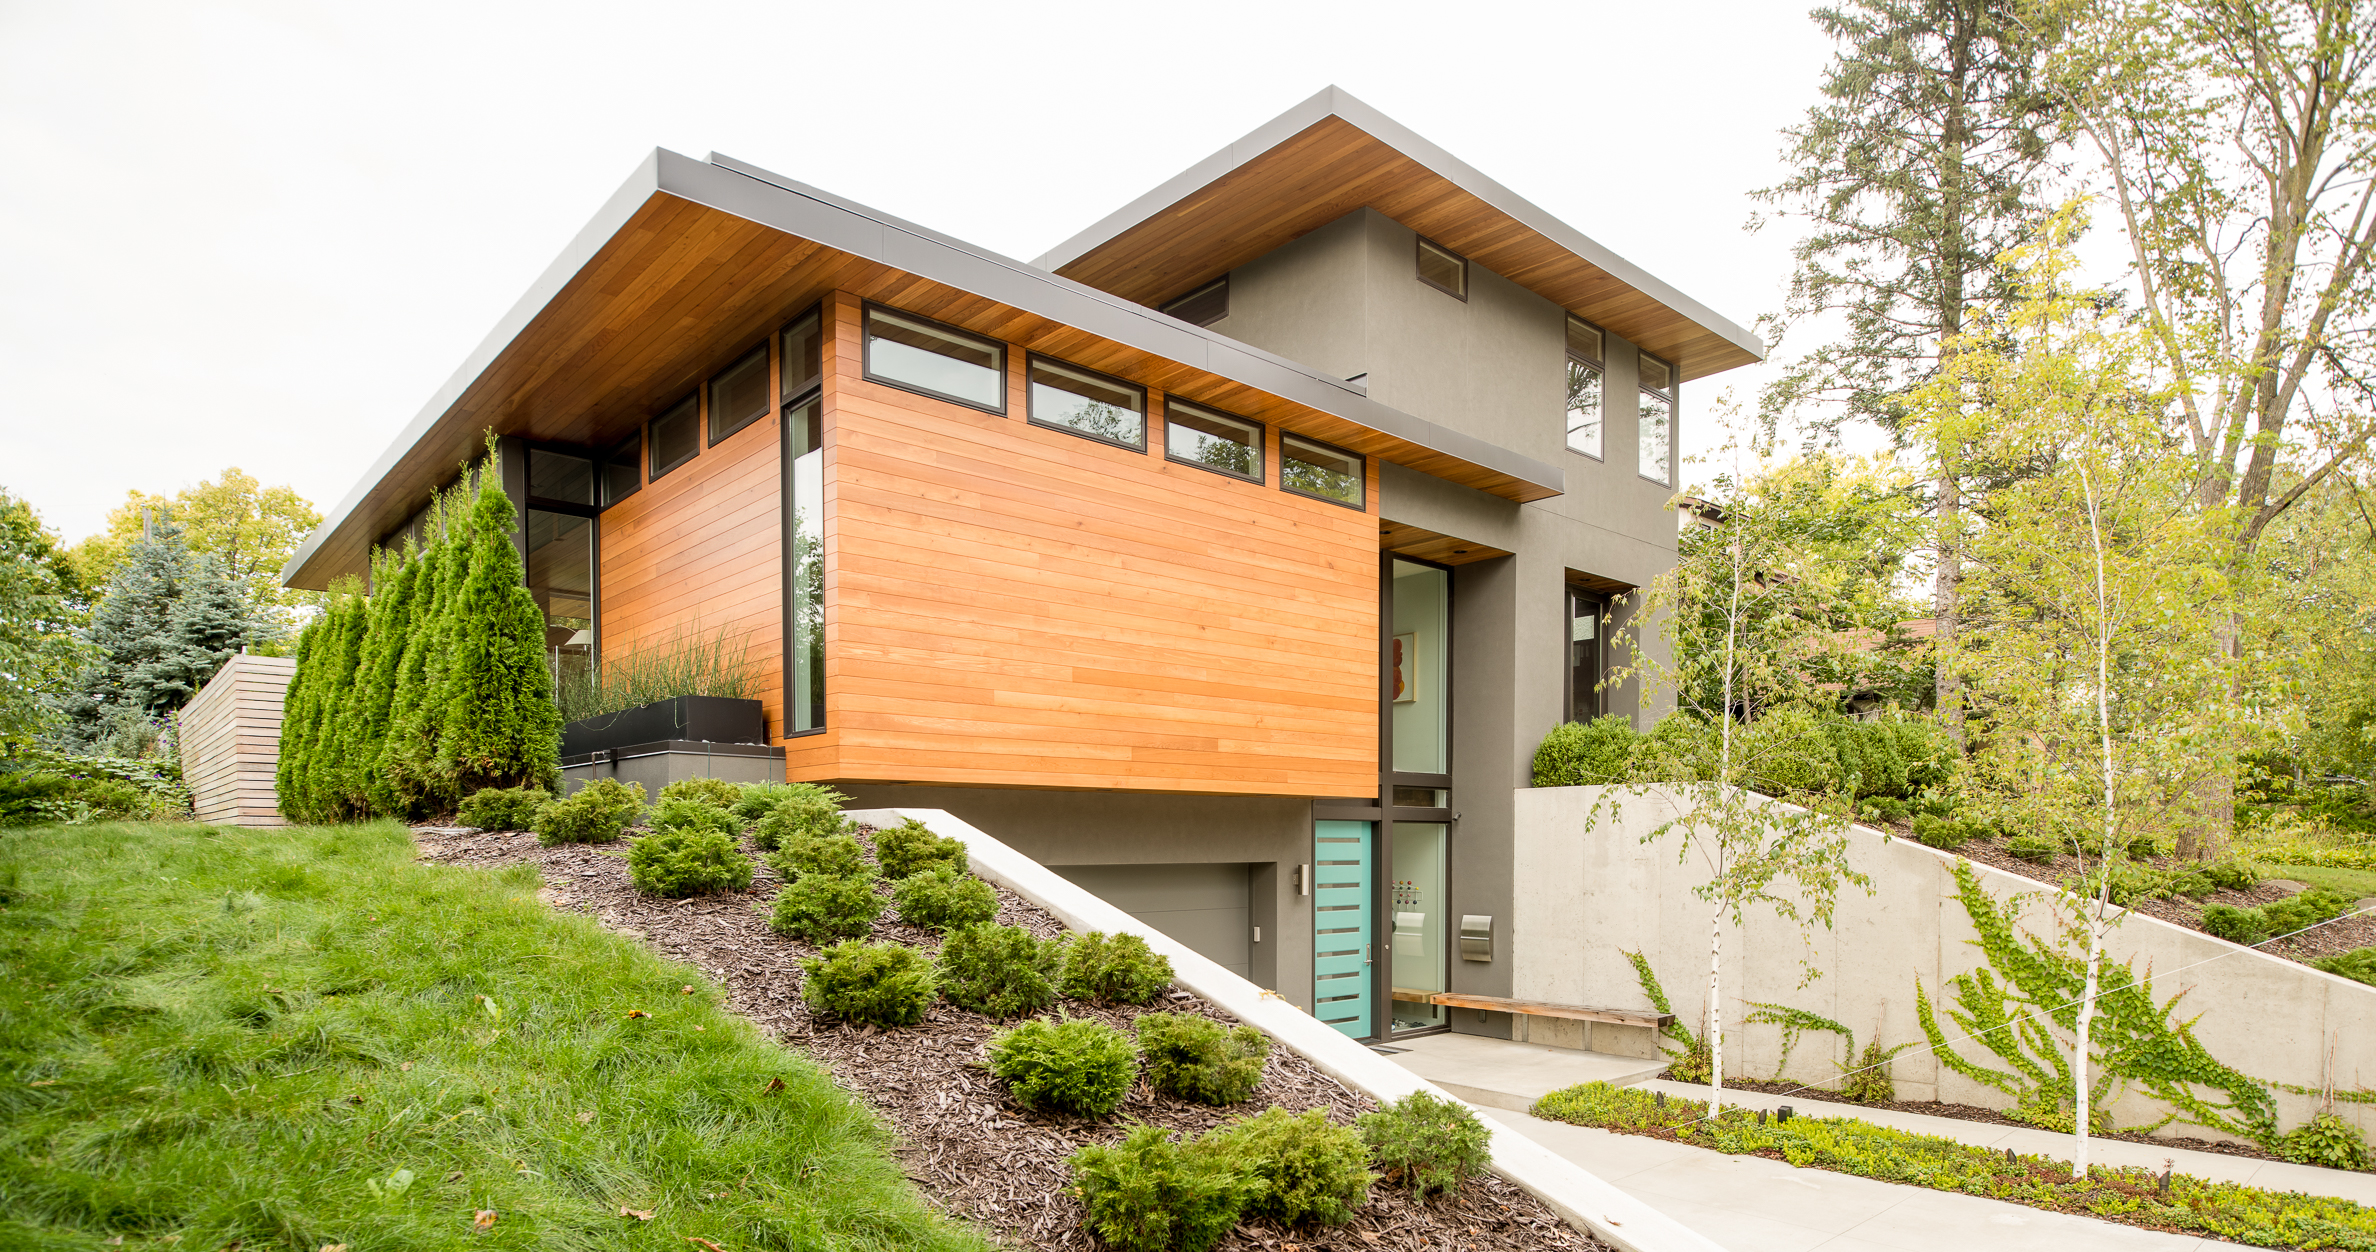 Modern wood and stucco home designed by Christian Dean Architecture